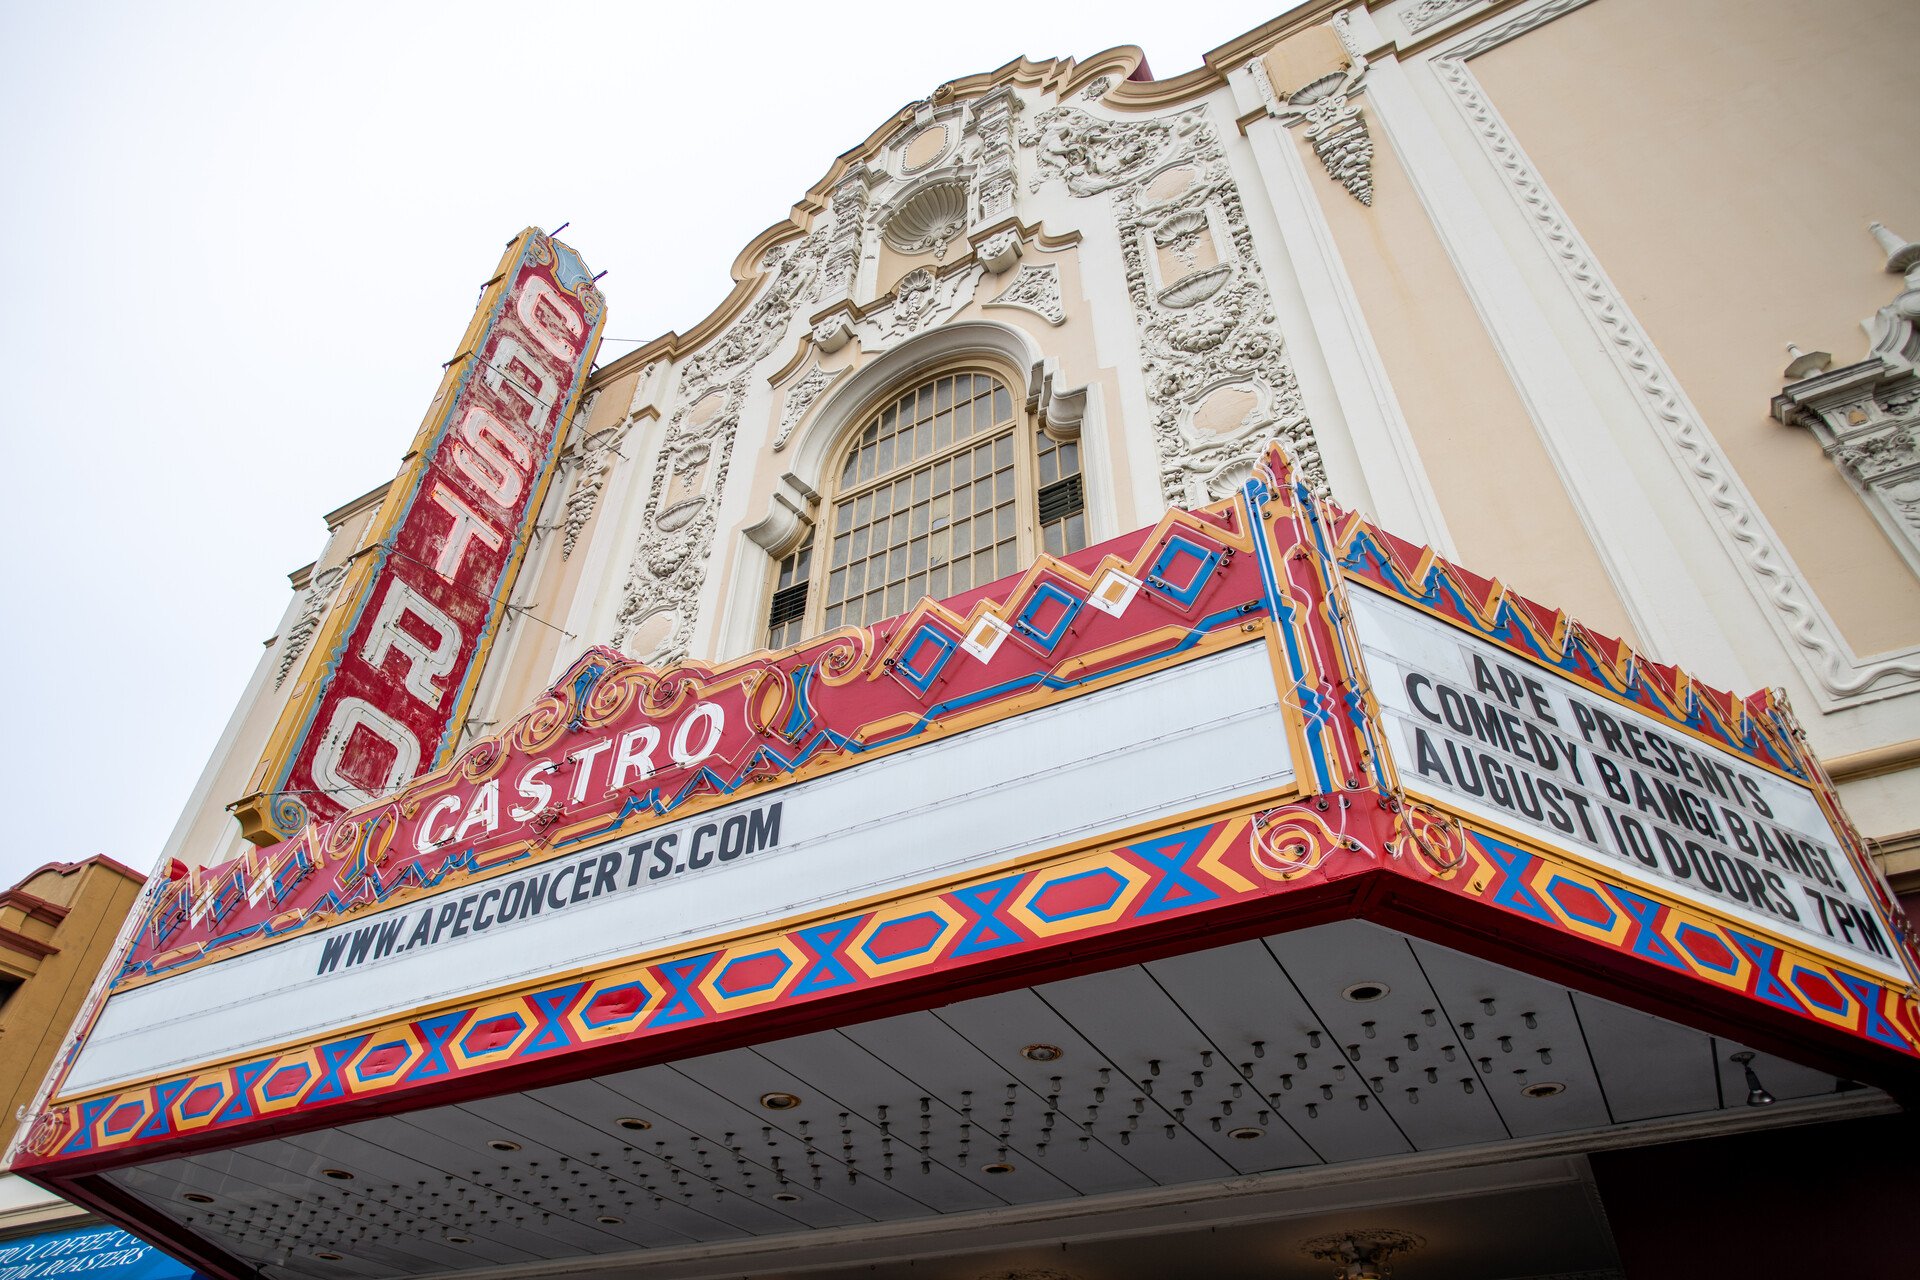 The facade of the Castro Theatre, taken from below.